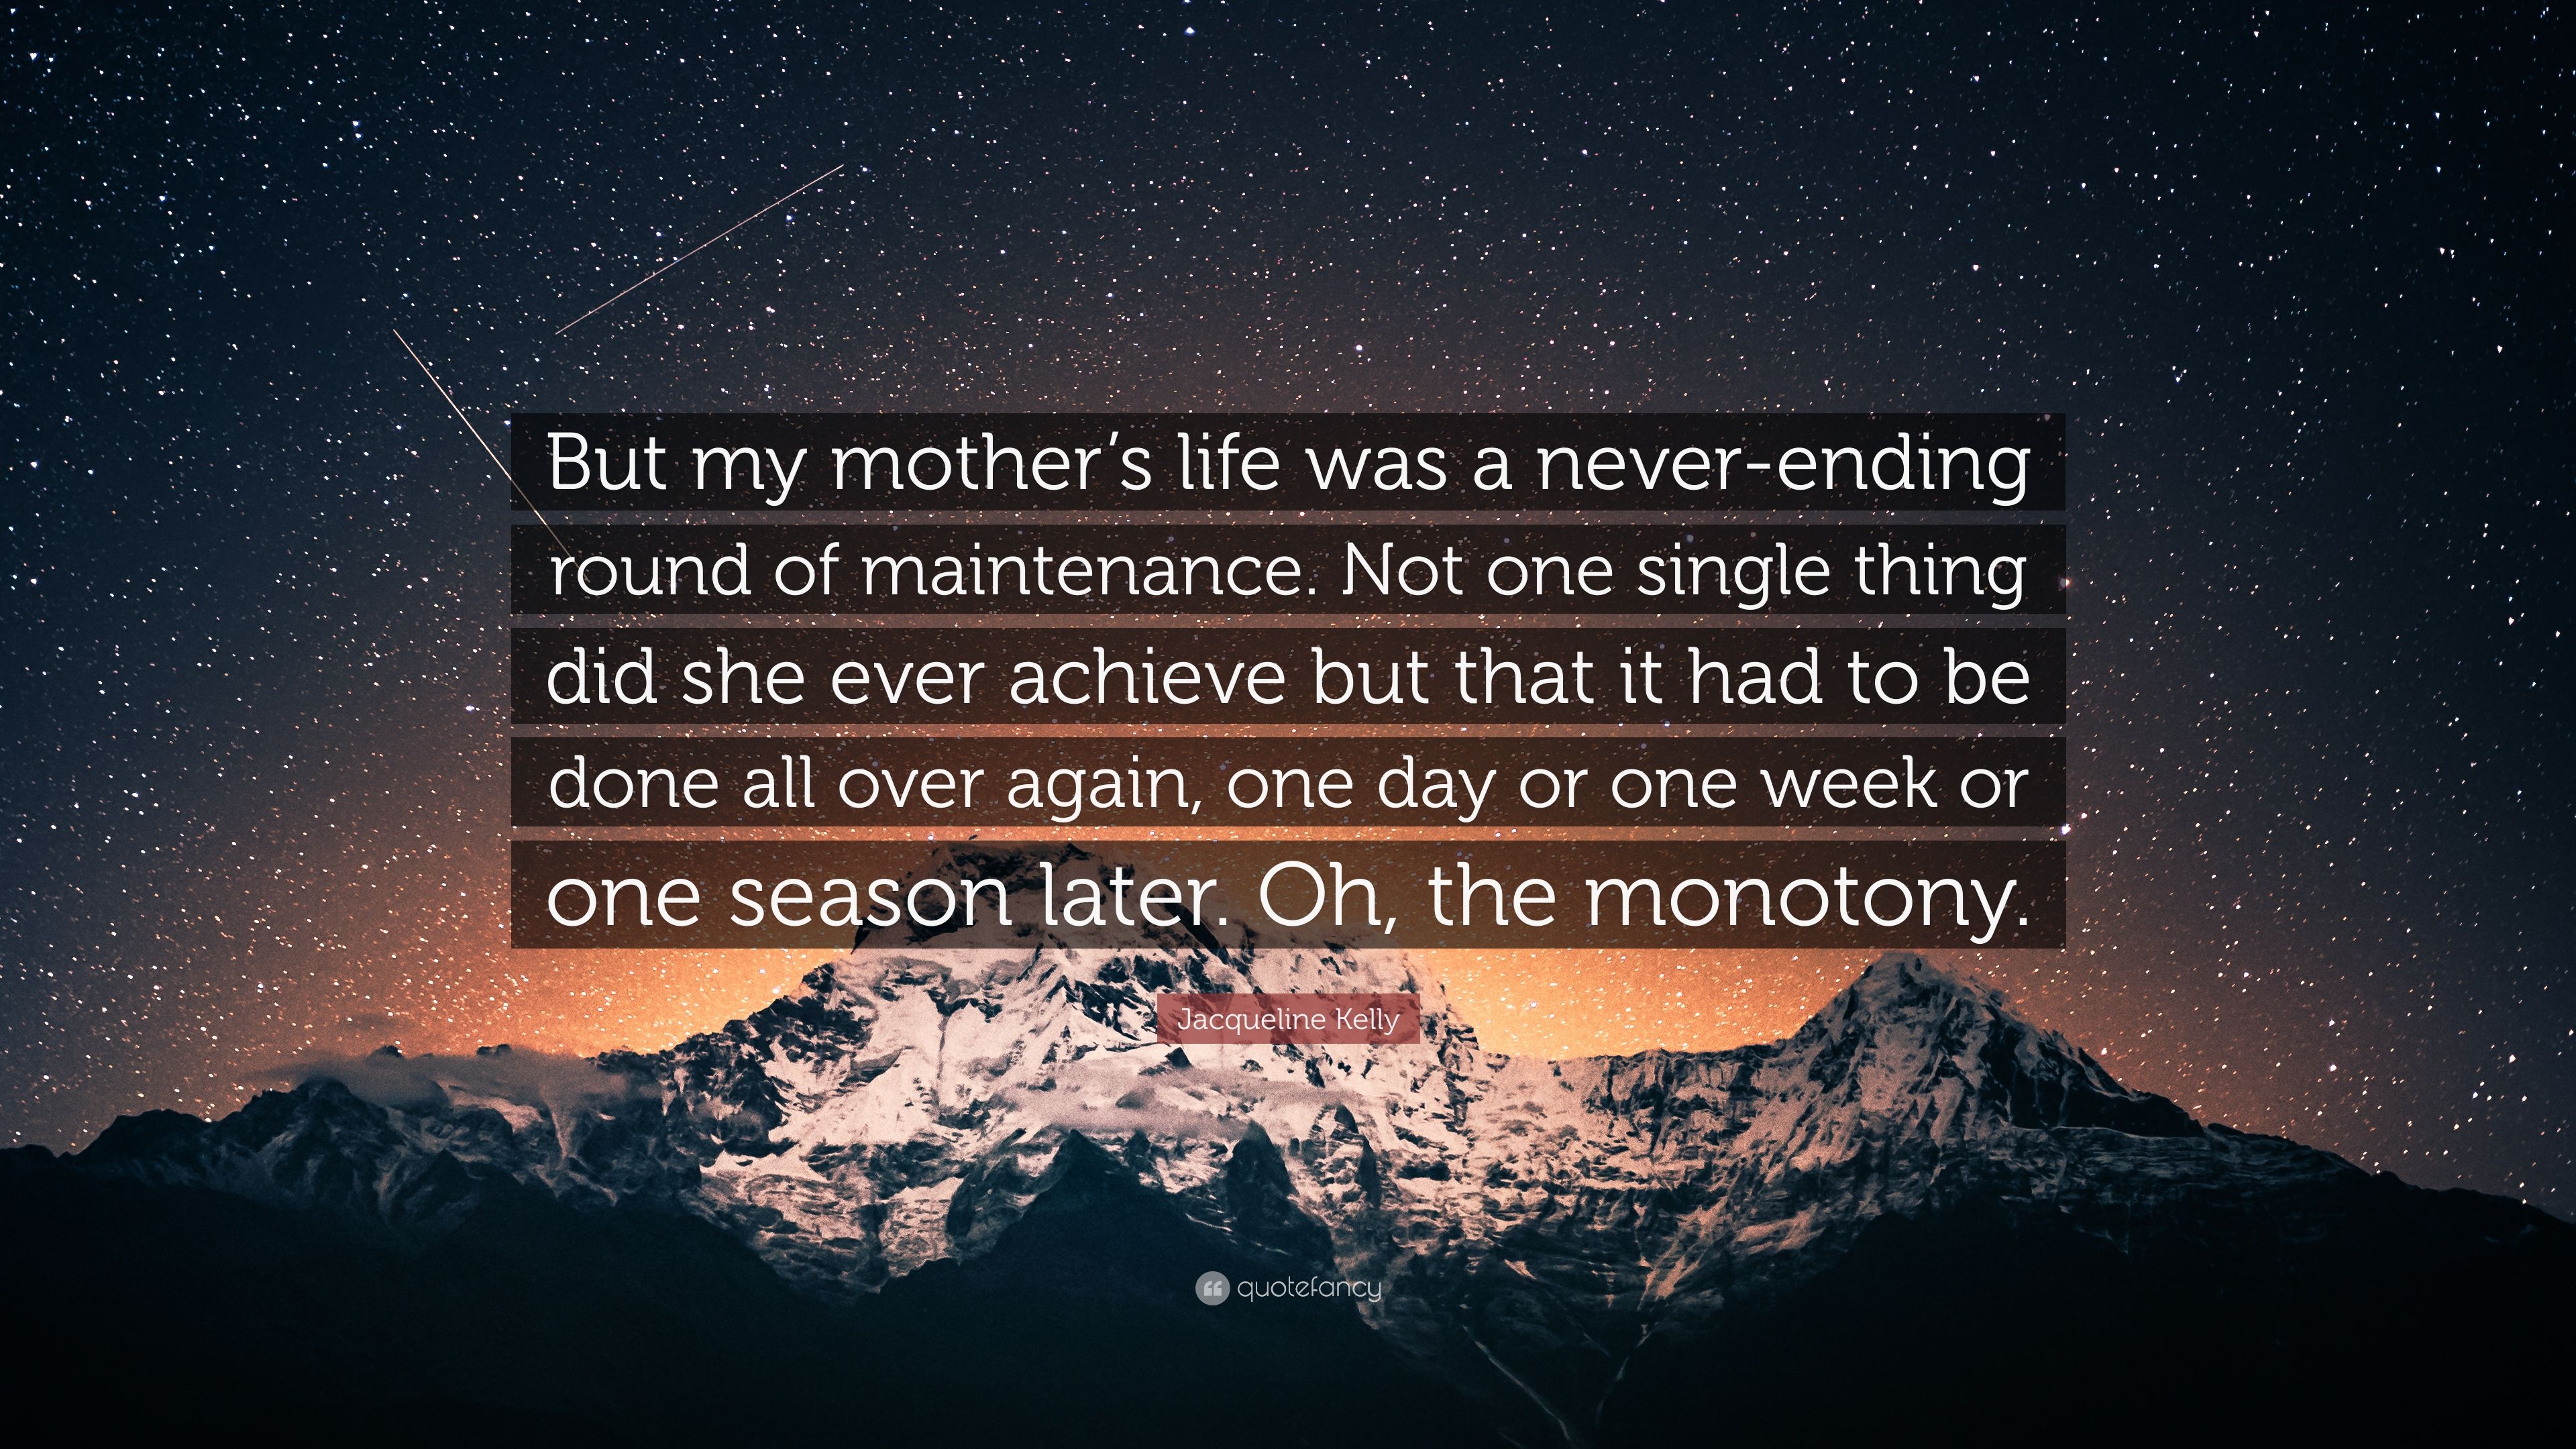 Jacqueline Kelly Quote: “But My Mother's Life Was A Never Ending